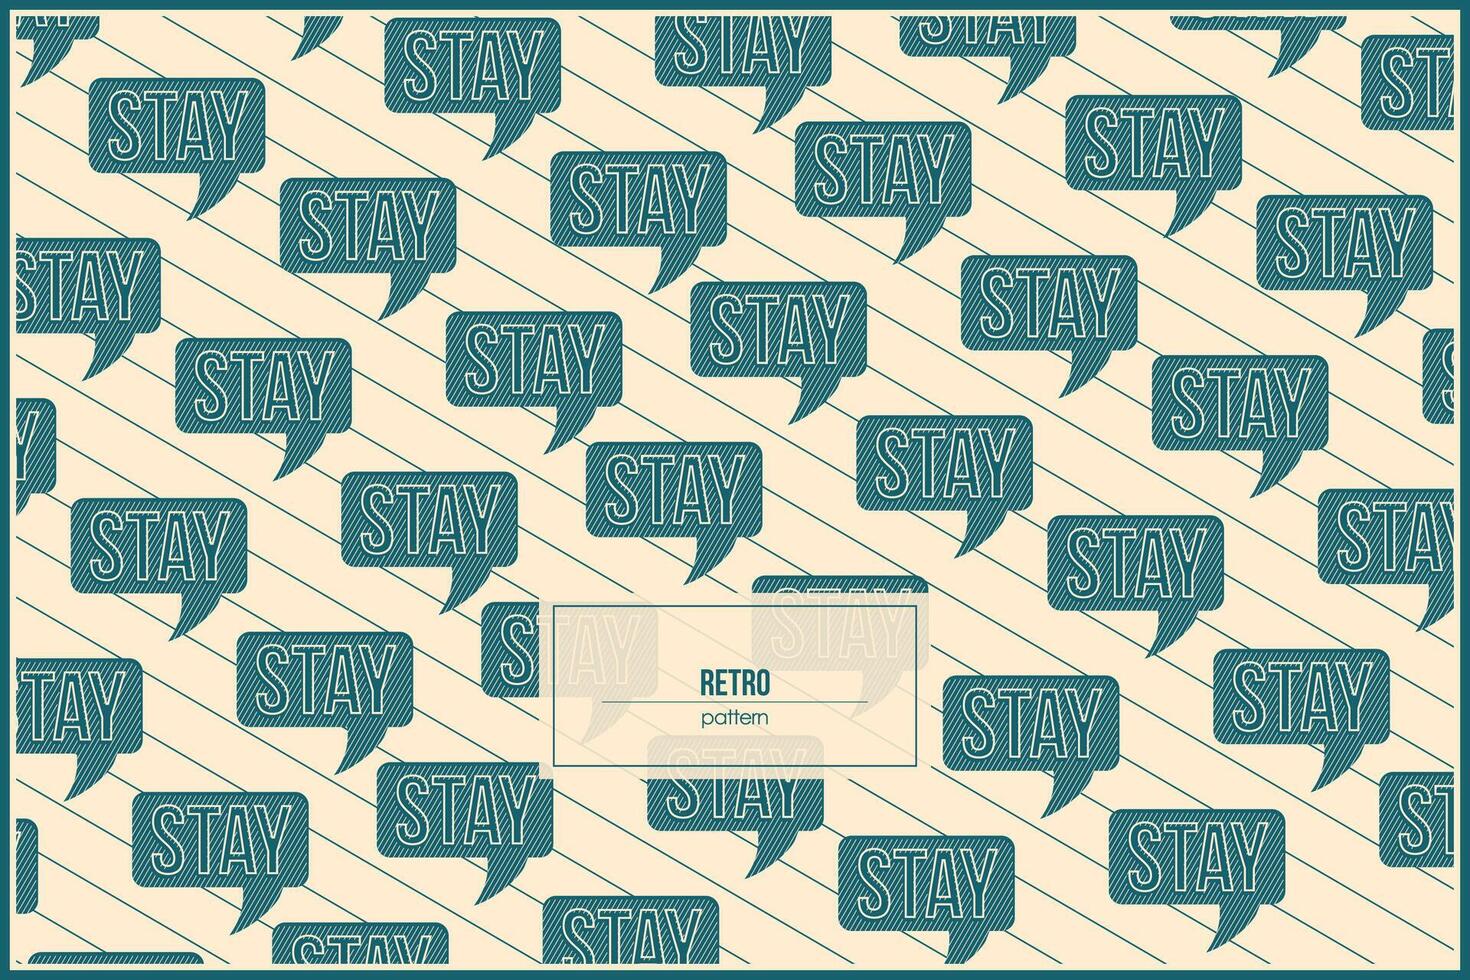 retro pattern of the word stay inside Speech balloons vector